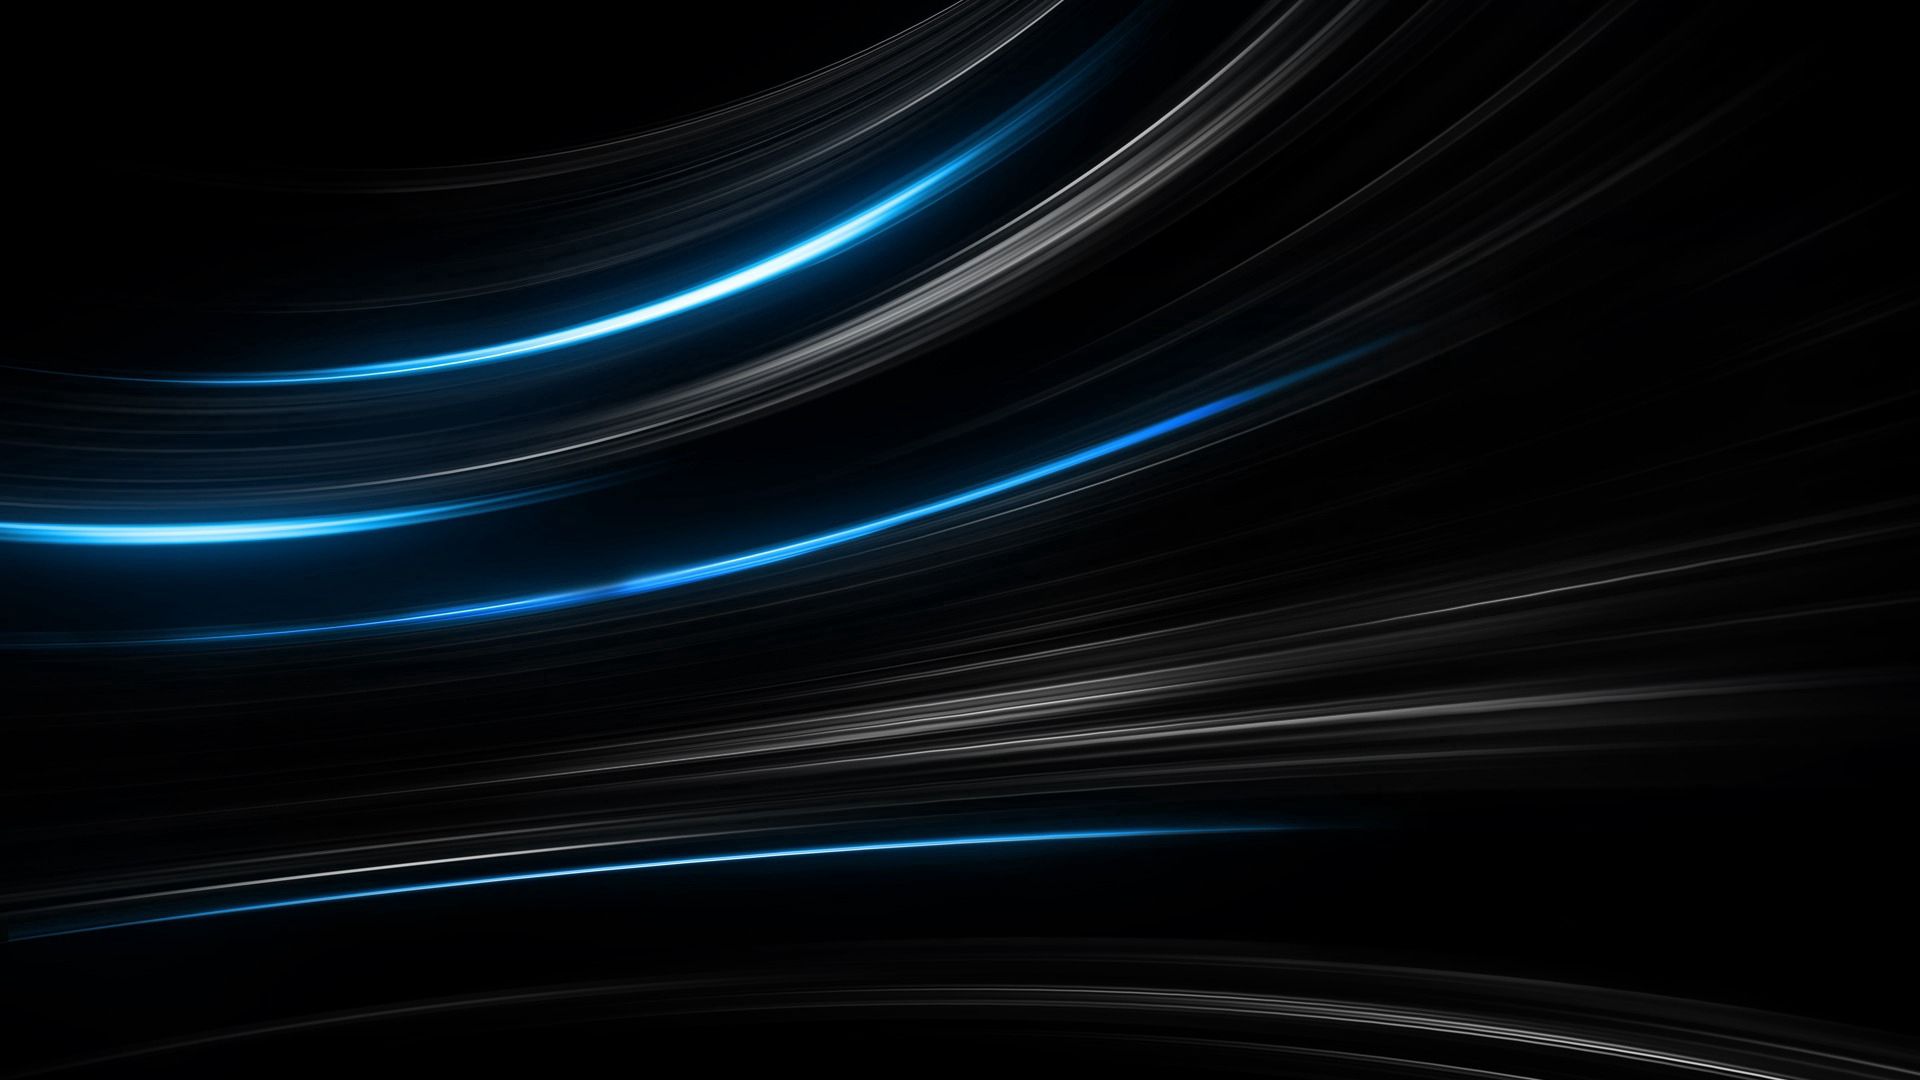 Download wallpaper 1920x1080 black, blue, abstract, stripes hd background